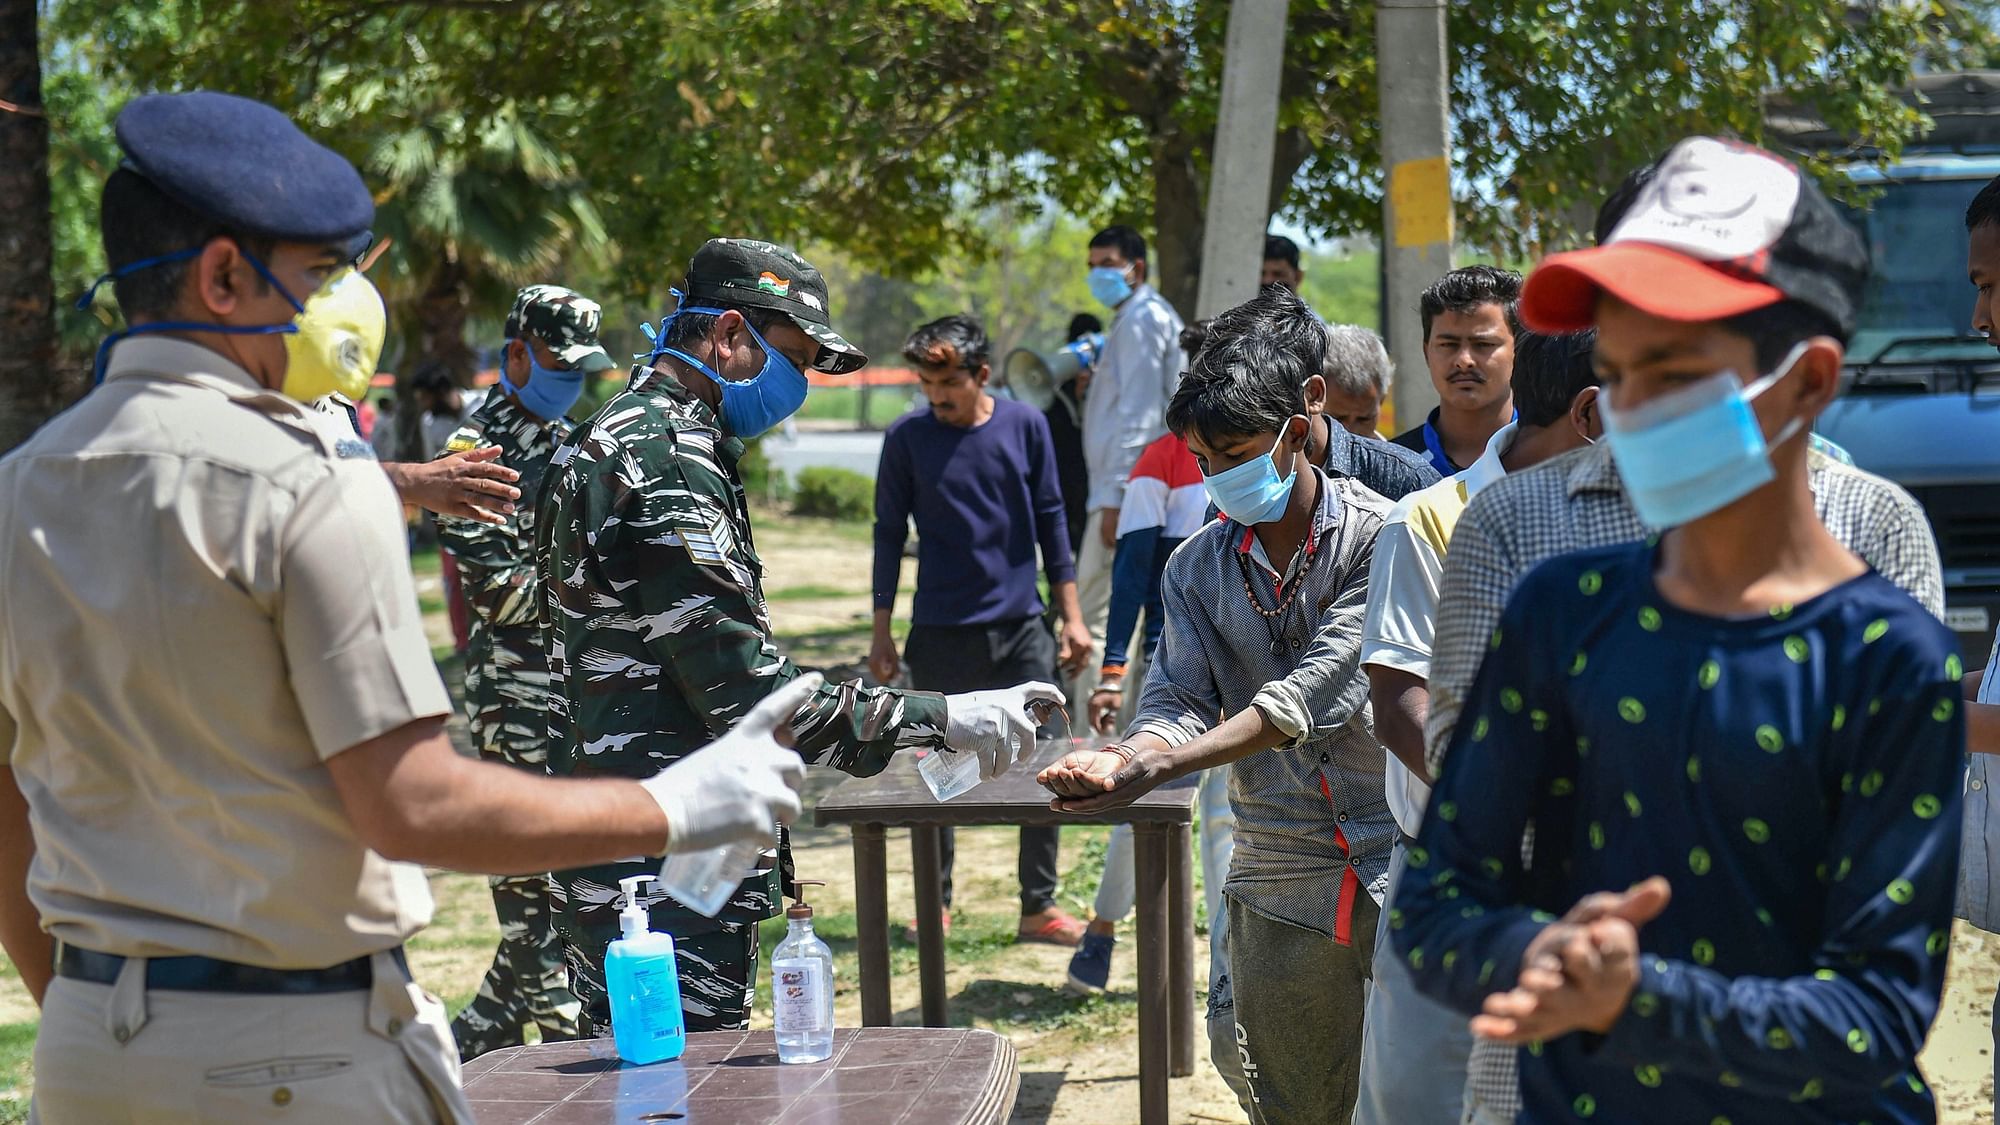  CRPF personnel pump hand sanitiser on the hands of people during a nationwide lockdown, imposed in the wake of coronavirus pandemic, in New Delhi, Monday,  30 March.